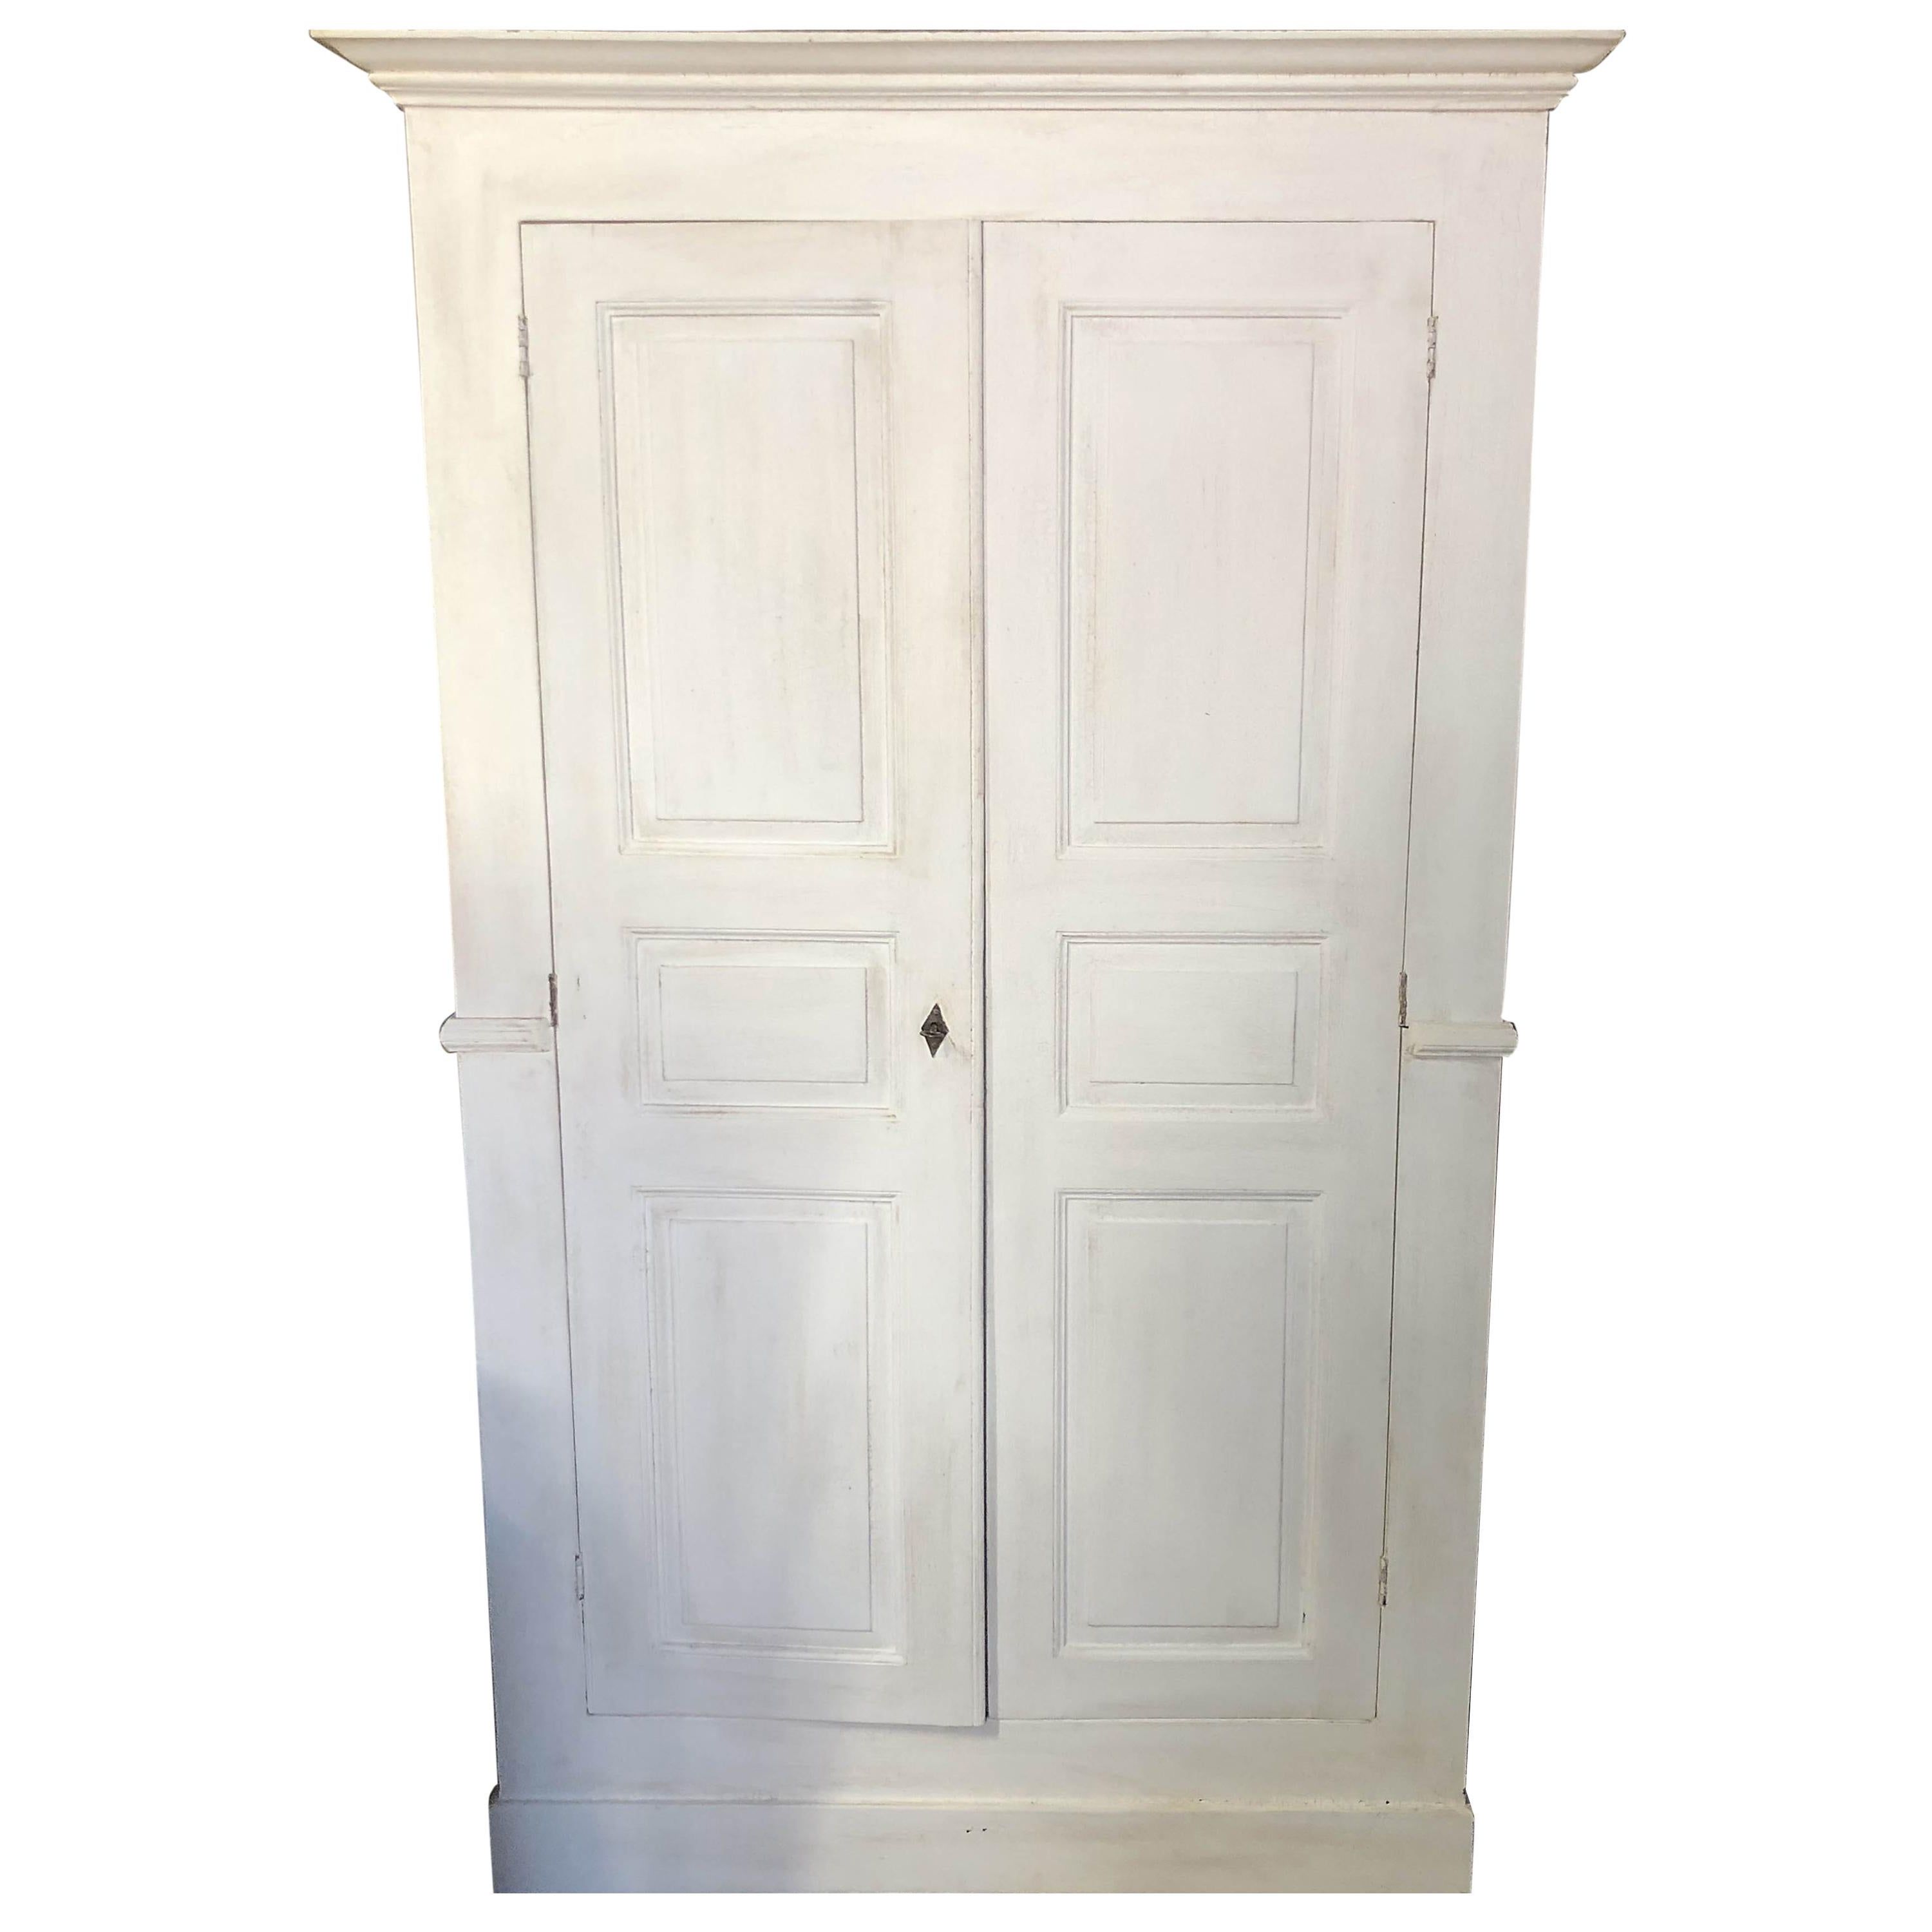 Italian Shabby White Piedmontese Wardrobe Sideboard Pantry Cabinet Shelves  For Sale At 1stdibs | Sideboard And Pantry Set, Sideboard With Pantry, White  Wardrobe Vintage Throughout White Shabby Chic Wardrobes (Gallery 17 of 20)